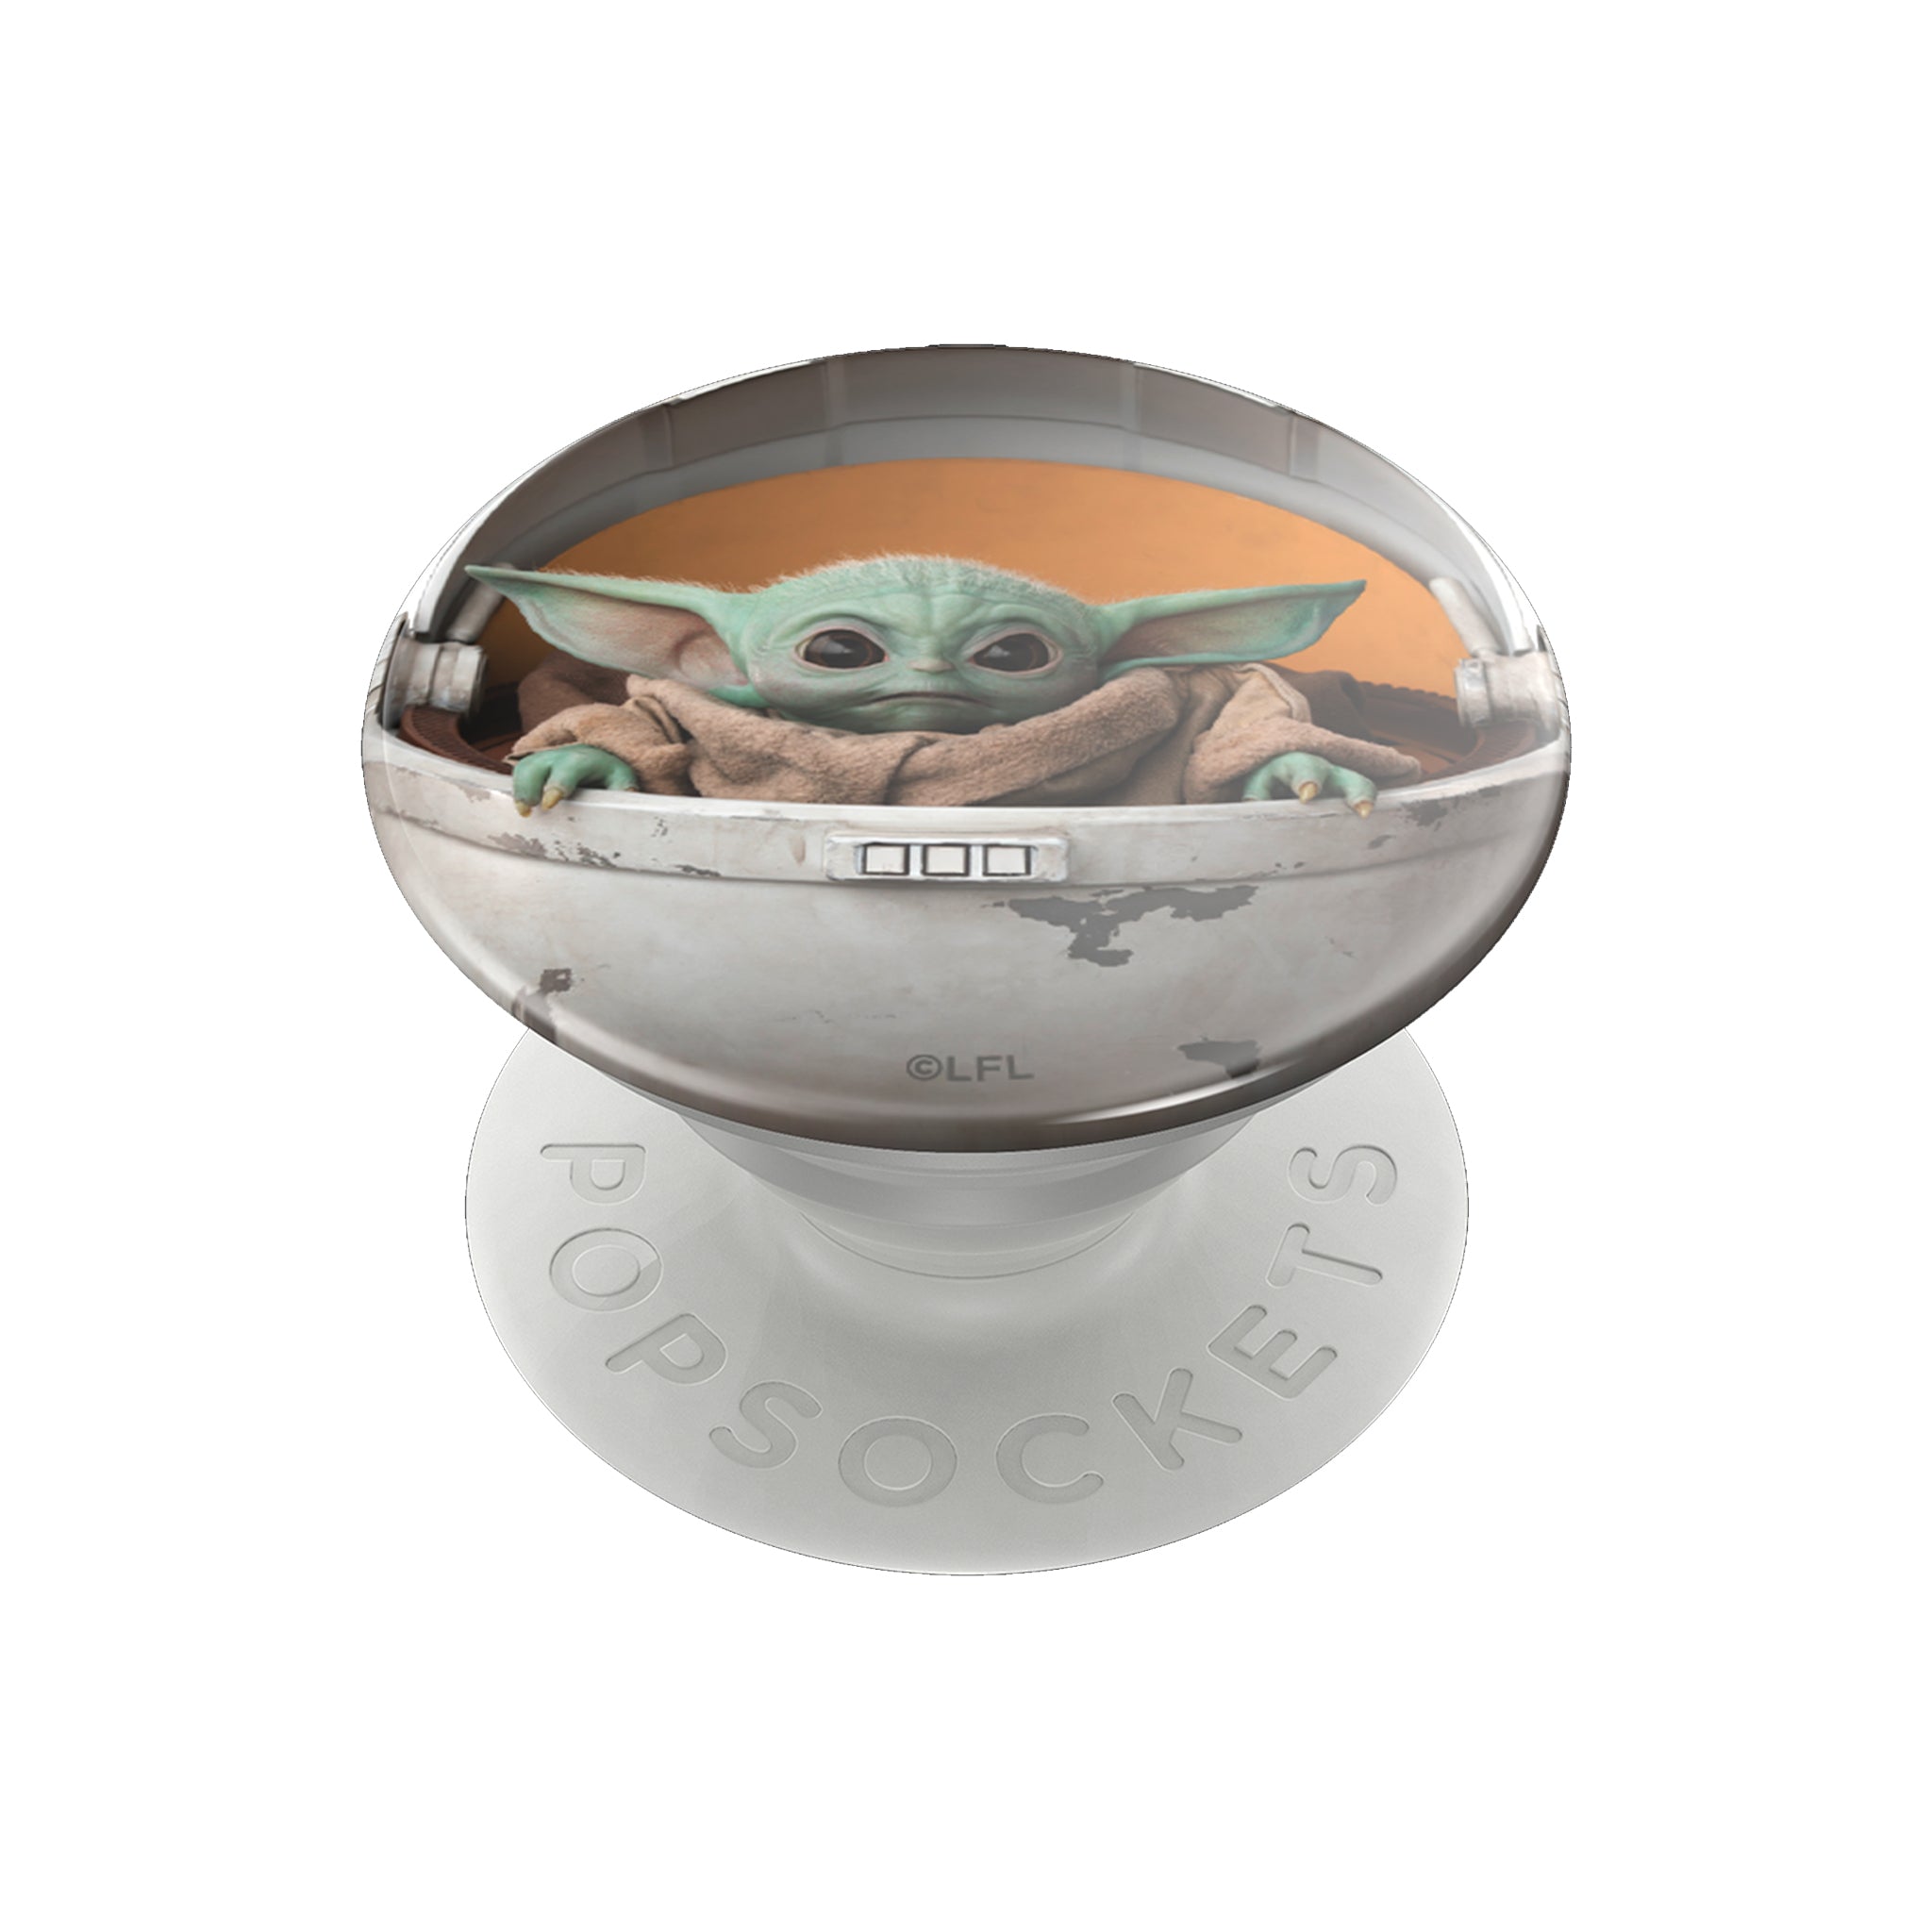 Popsockets - Popgrip Licensed Swappable Device Stand And Grip - Baby Yoda Pod